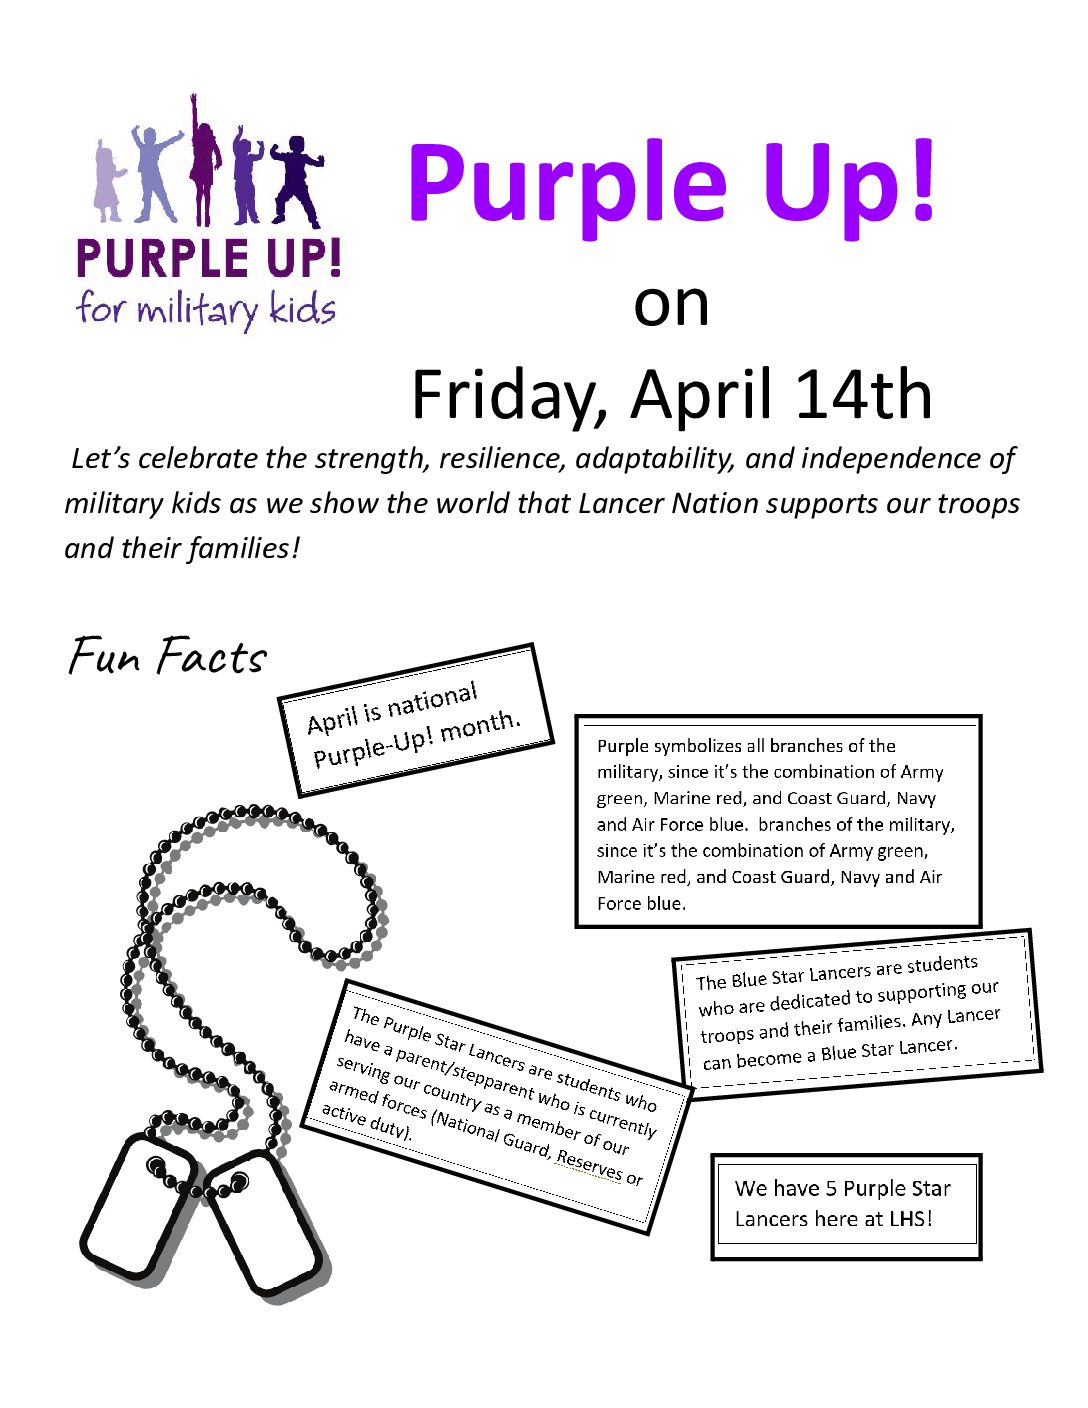 Blue Star Lancers launch their Purple-Up campaign in support of LHS military families and troops. 